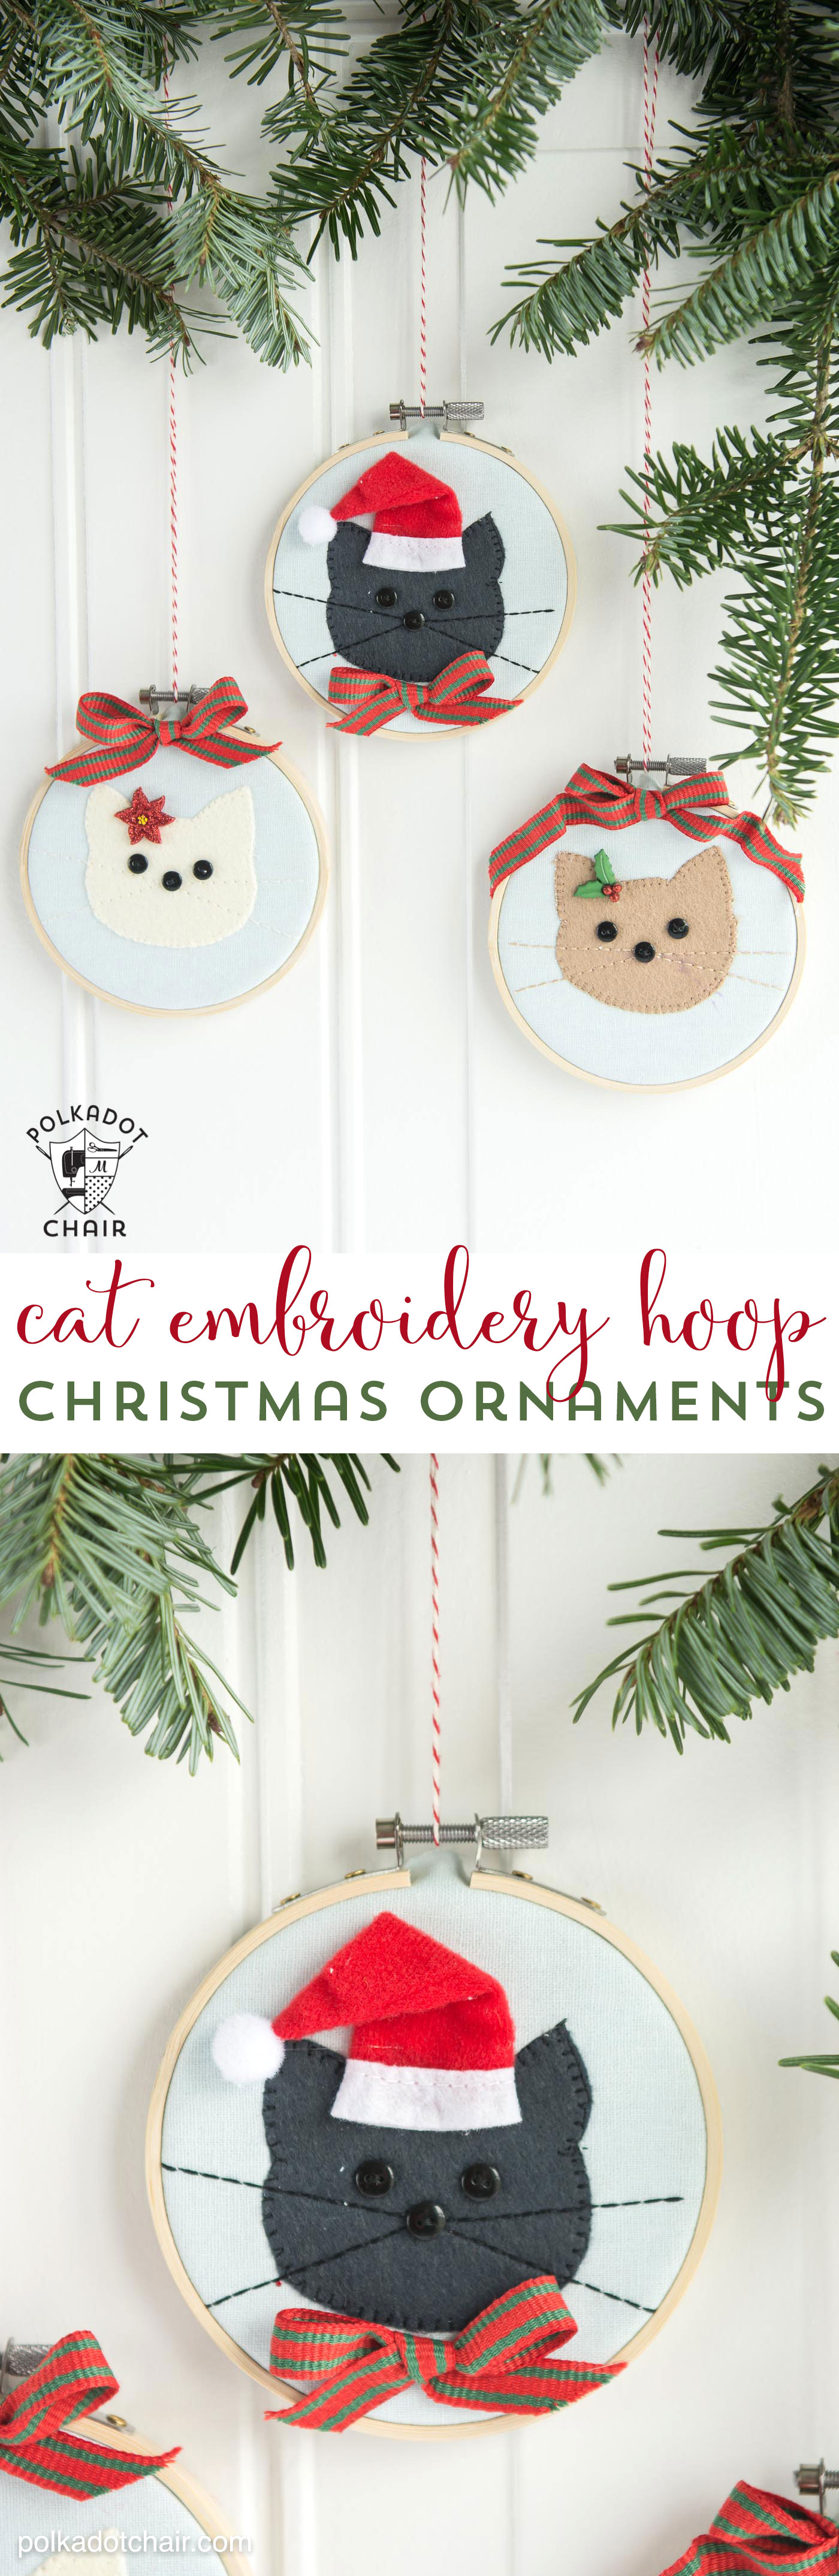 DIY Cat Embroidery Hoop Christmas Ornaments with instructions and free sewing pattern on polkadotchair.com